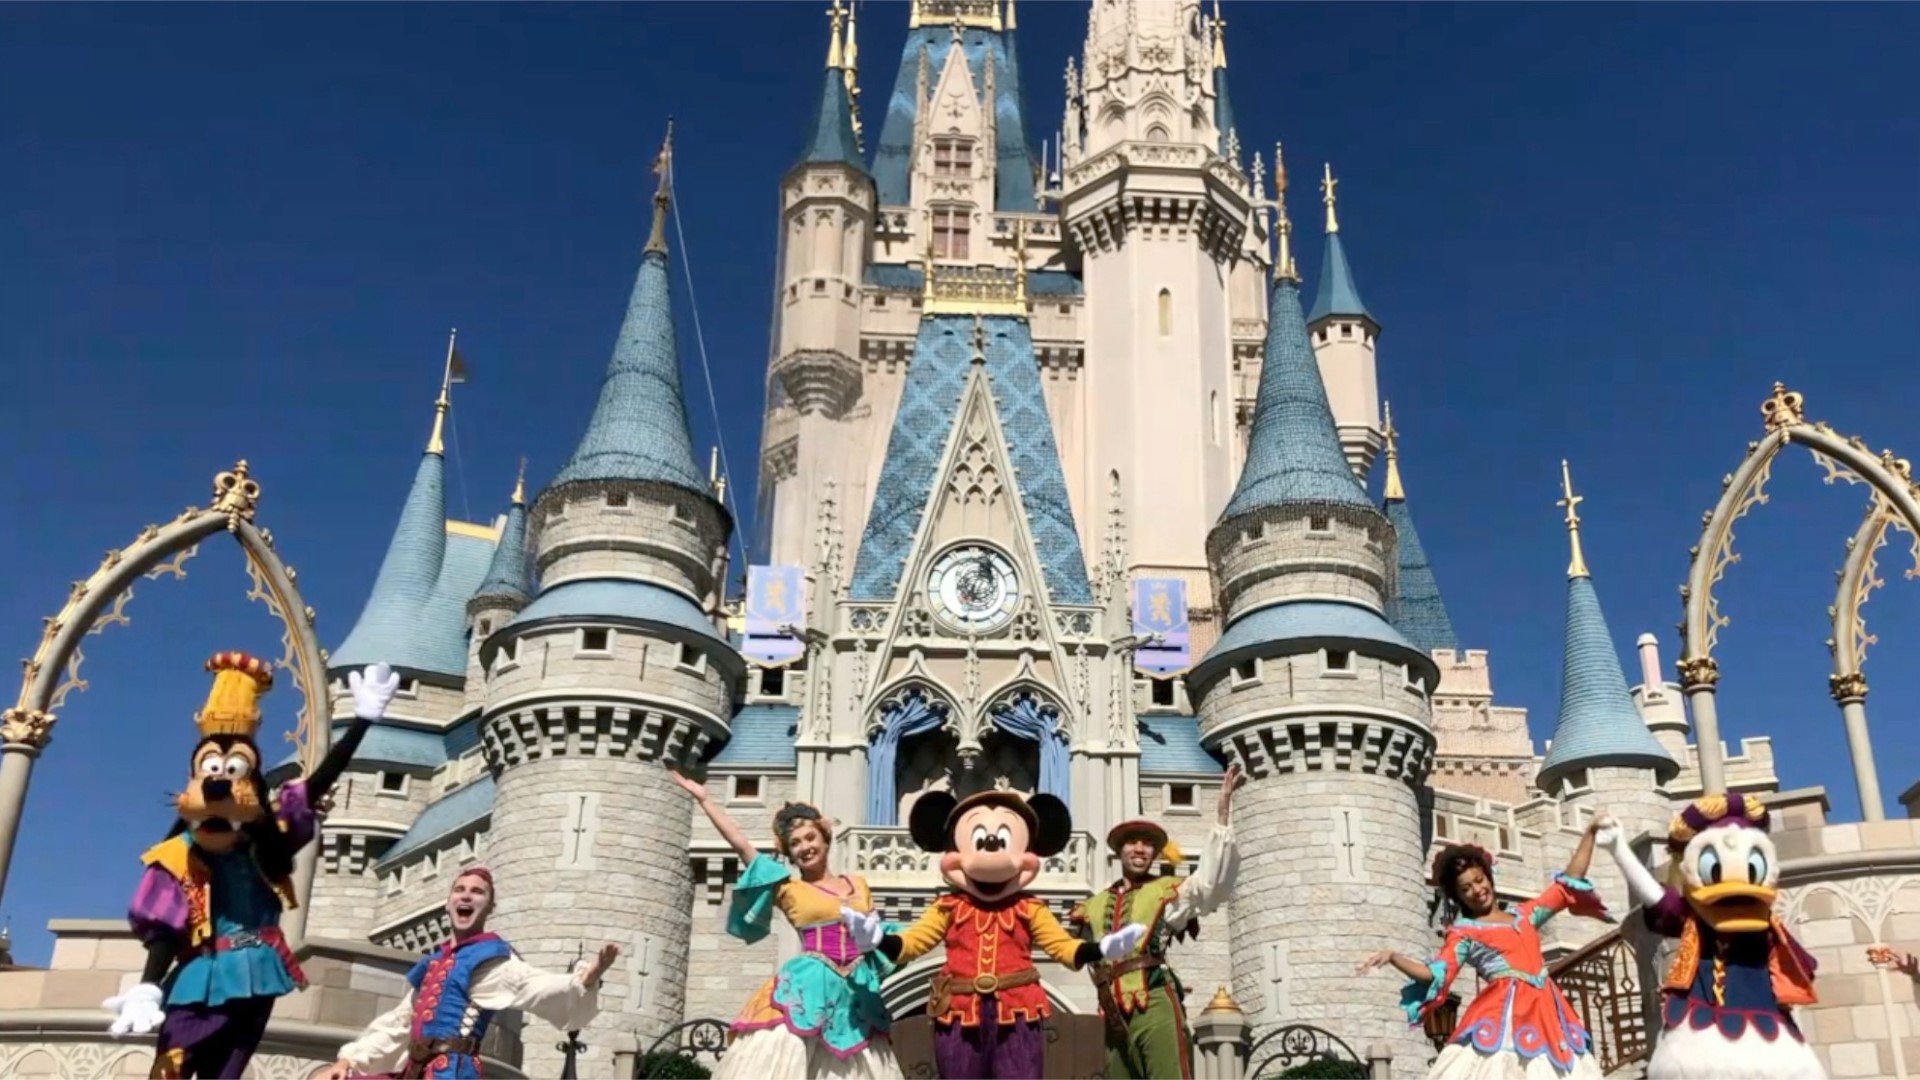 Disney World may soon go mask free for the vaccinated.